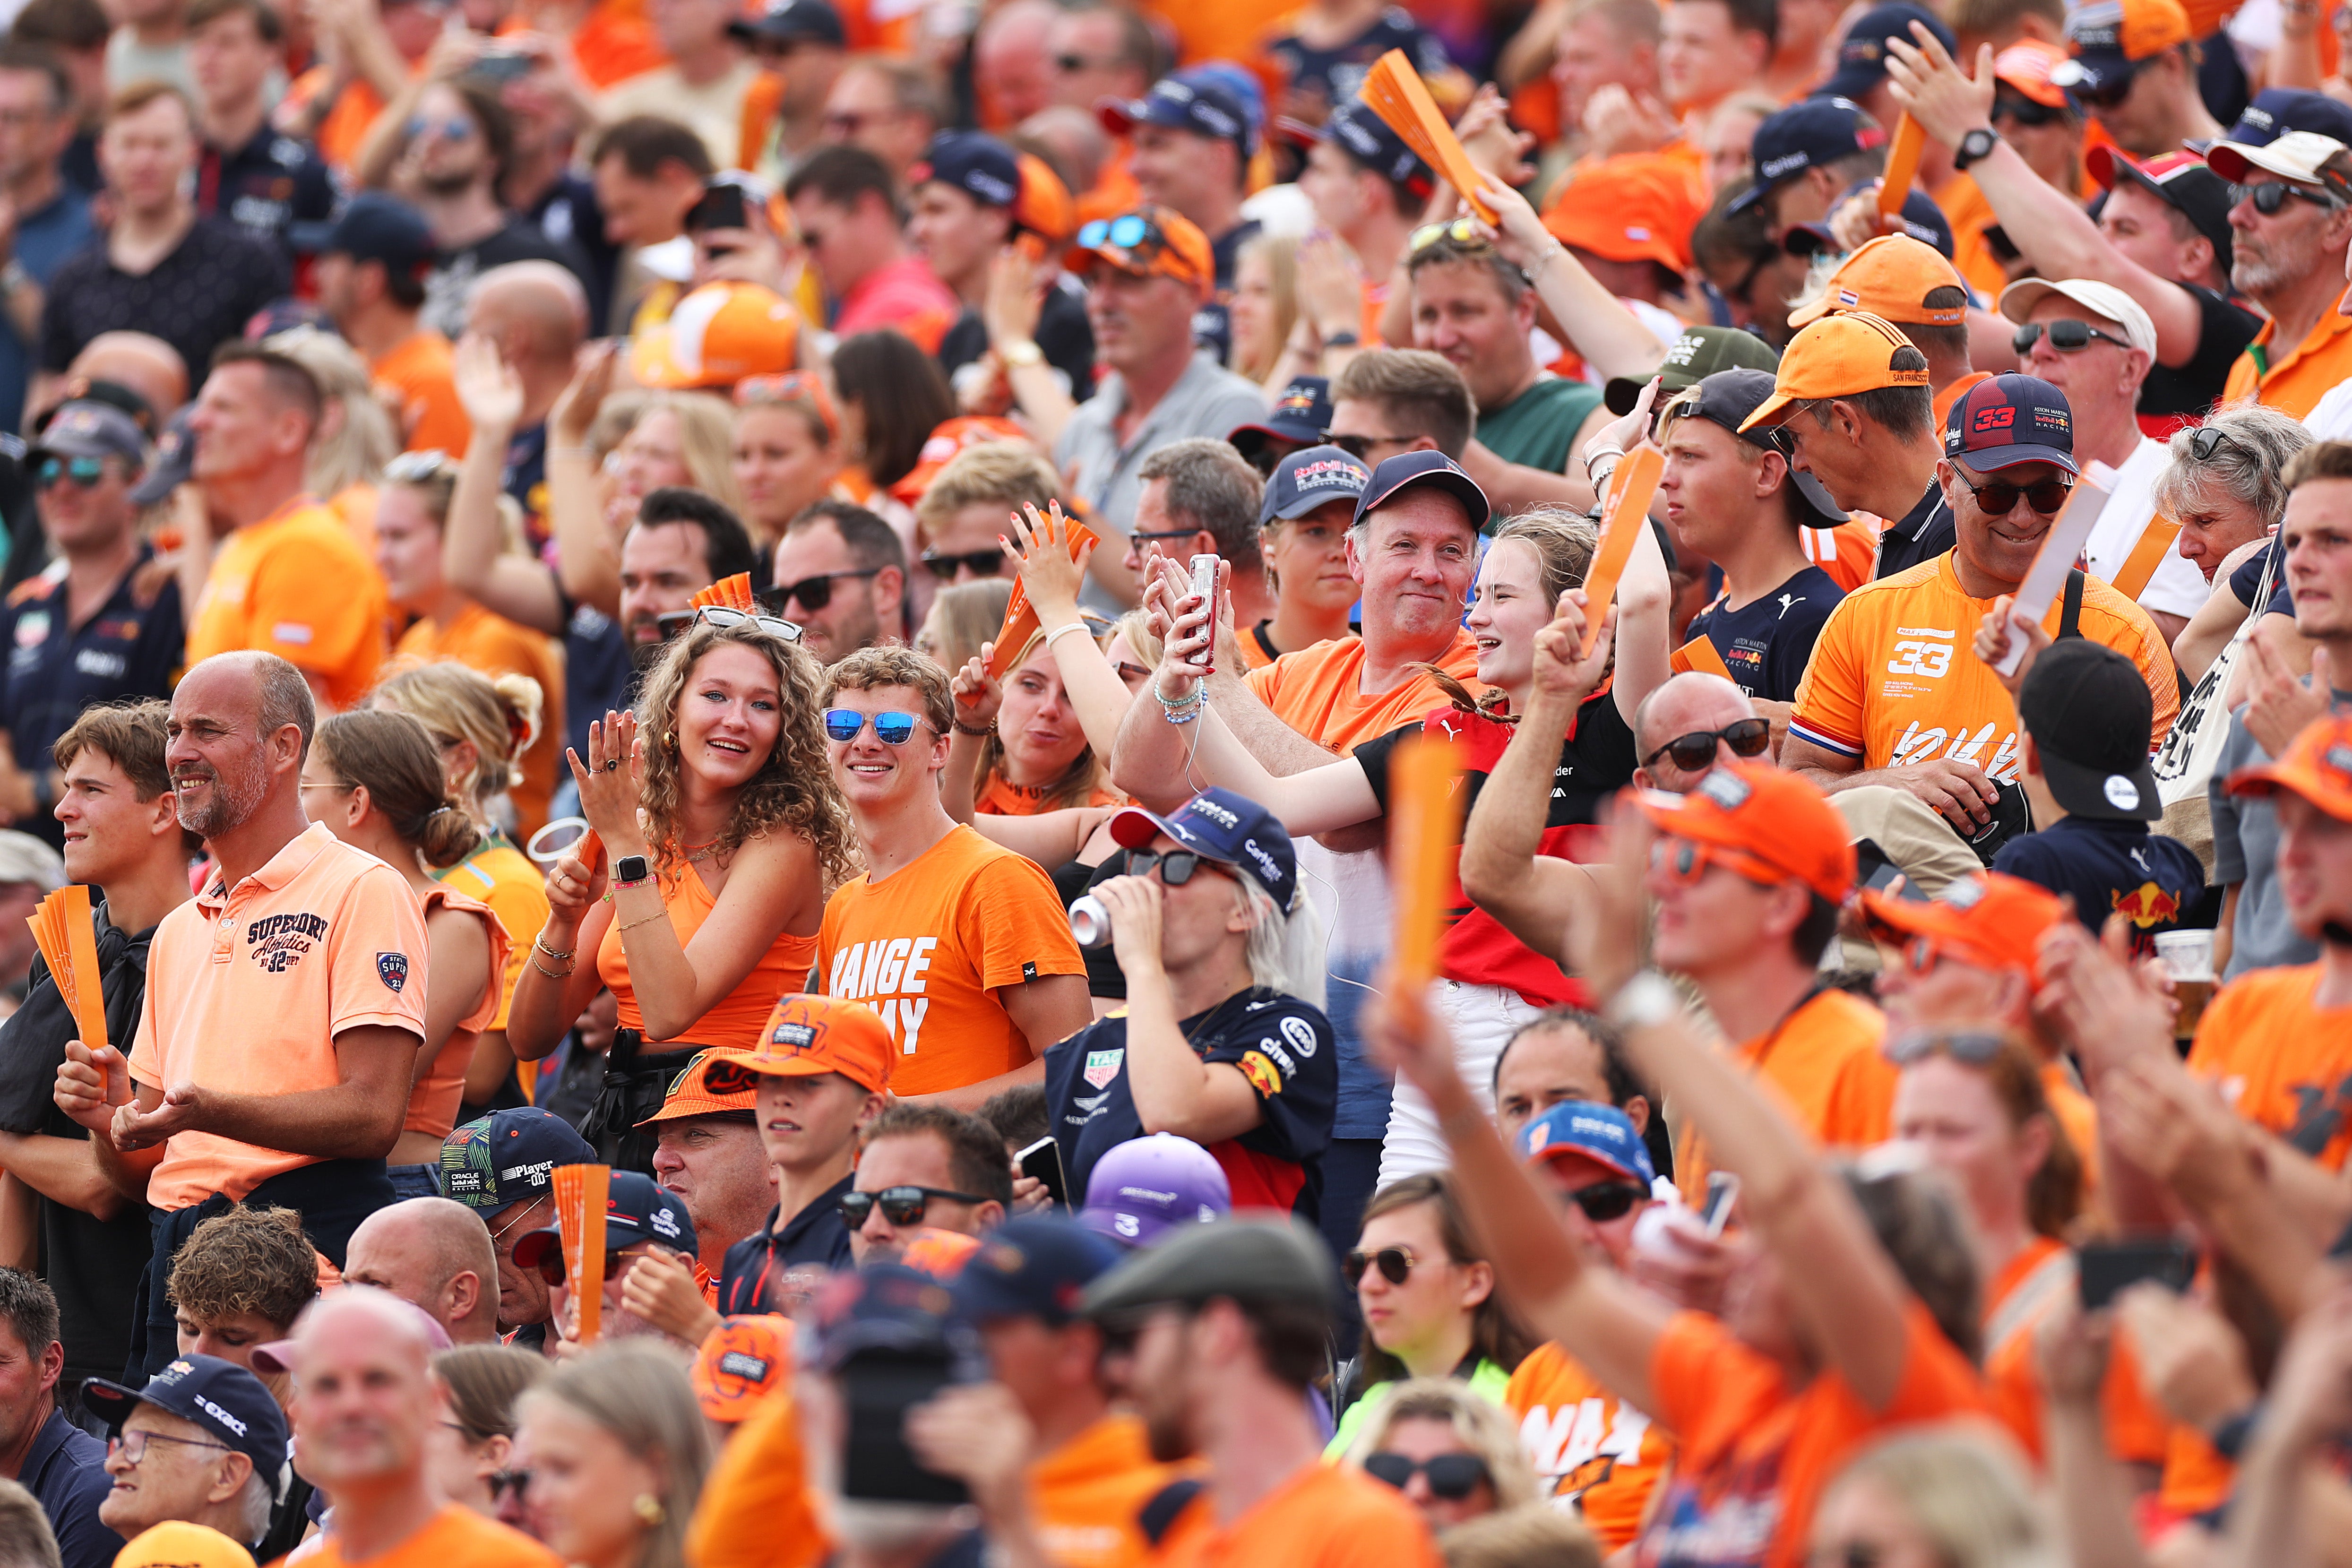 The Dutch Grand Prix is swarmed by orange-clad Max Verstappen fans on Friday